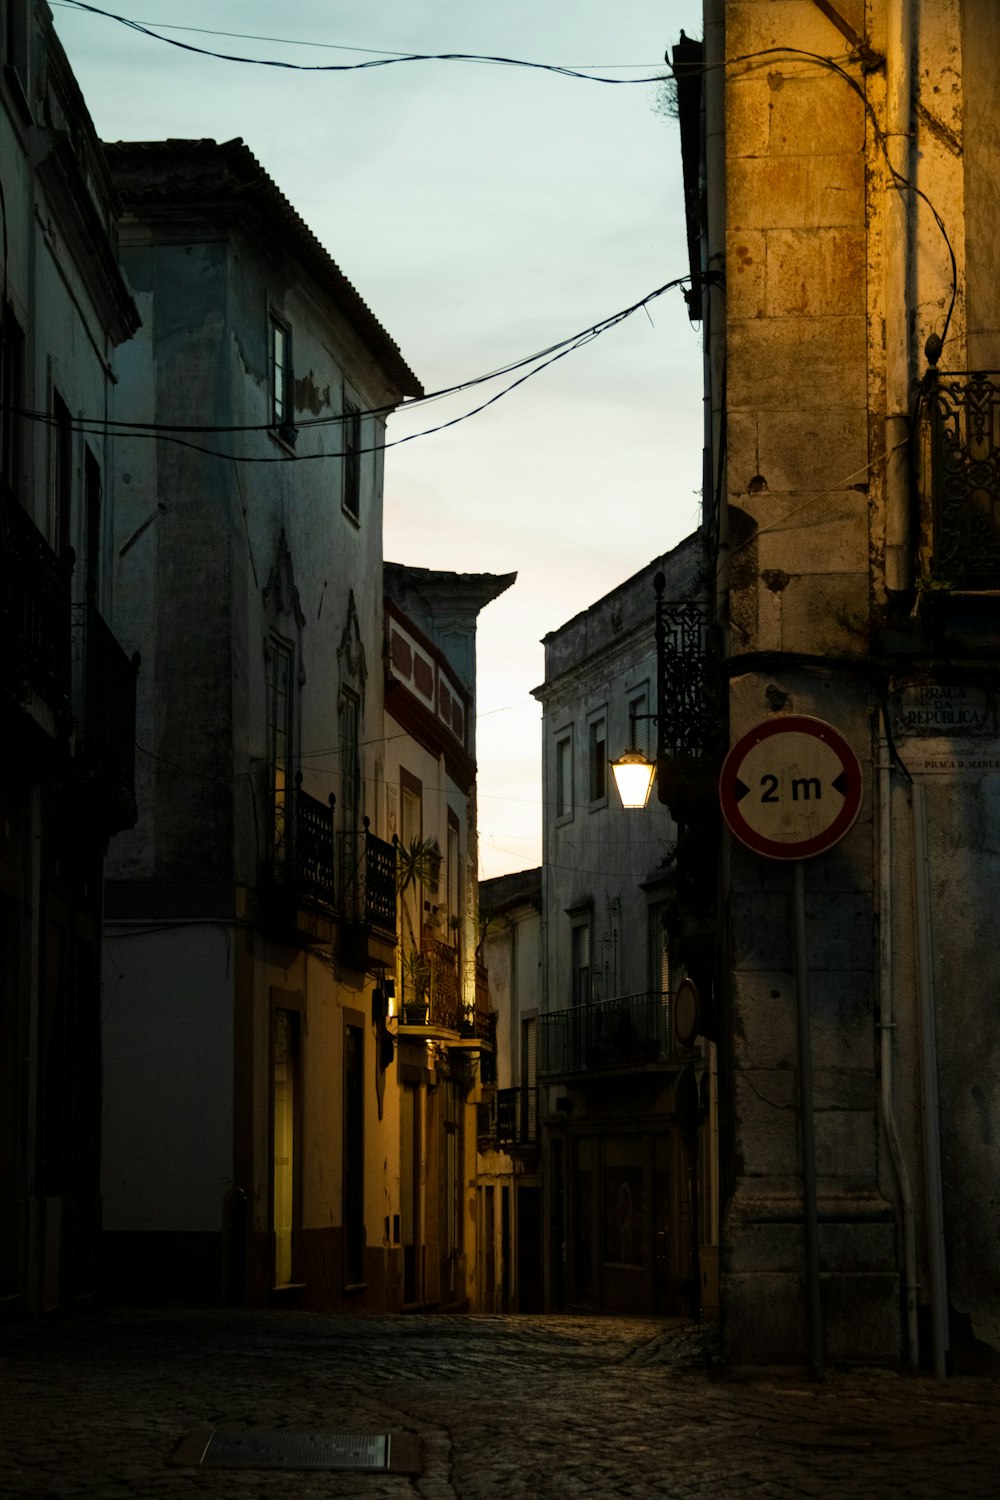 a dark alley way with a street sign and buildings